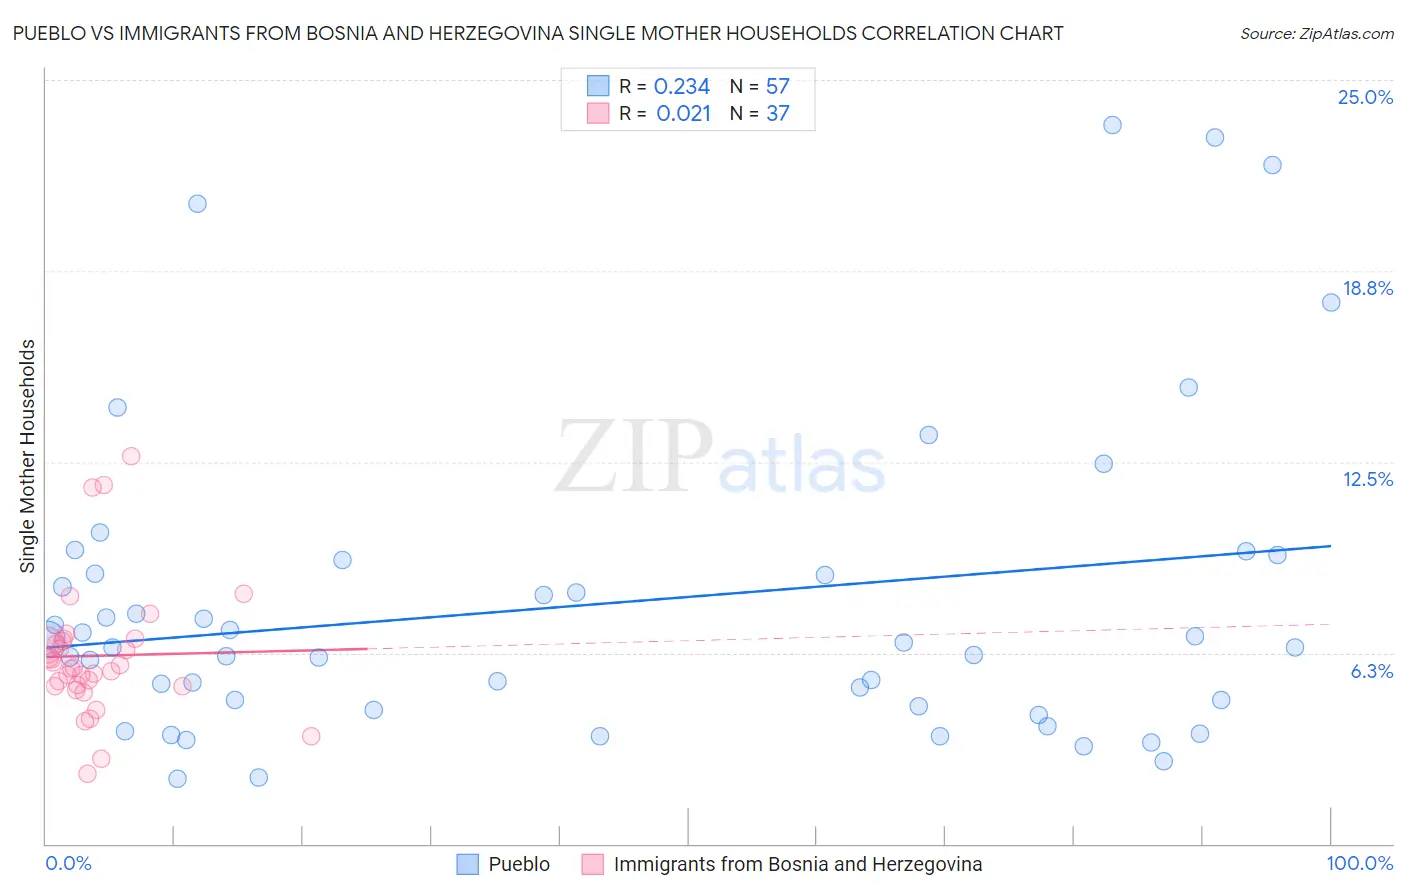 Pueblo vs Immigrants from Bosnia and Herzegovina Single Mother Households